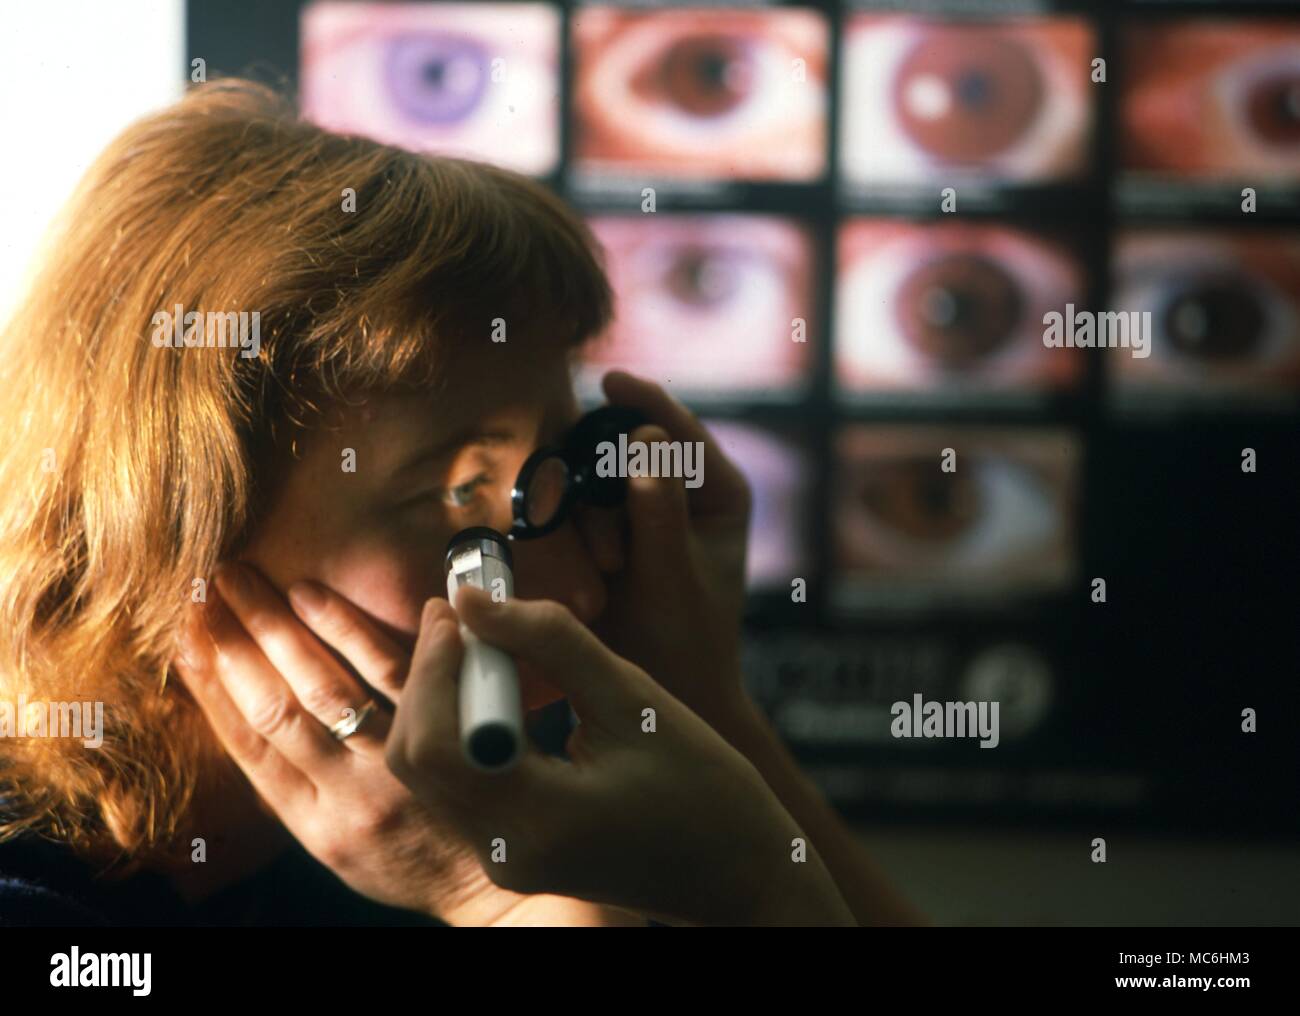 Iridology. Examining the eye of a patient against a background of iris images. Stock Photo